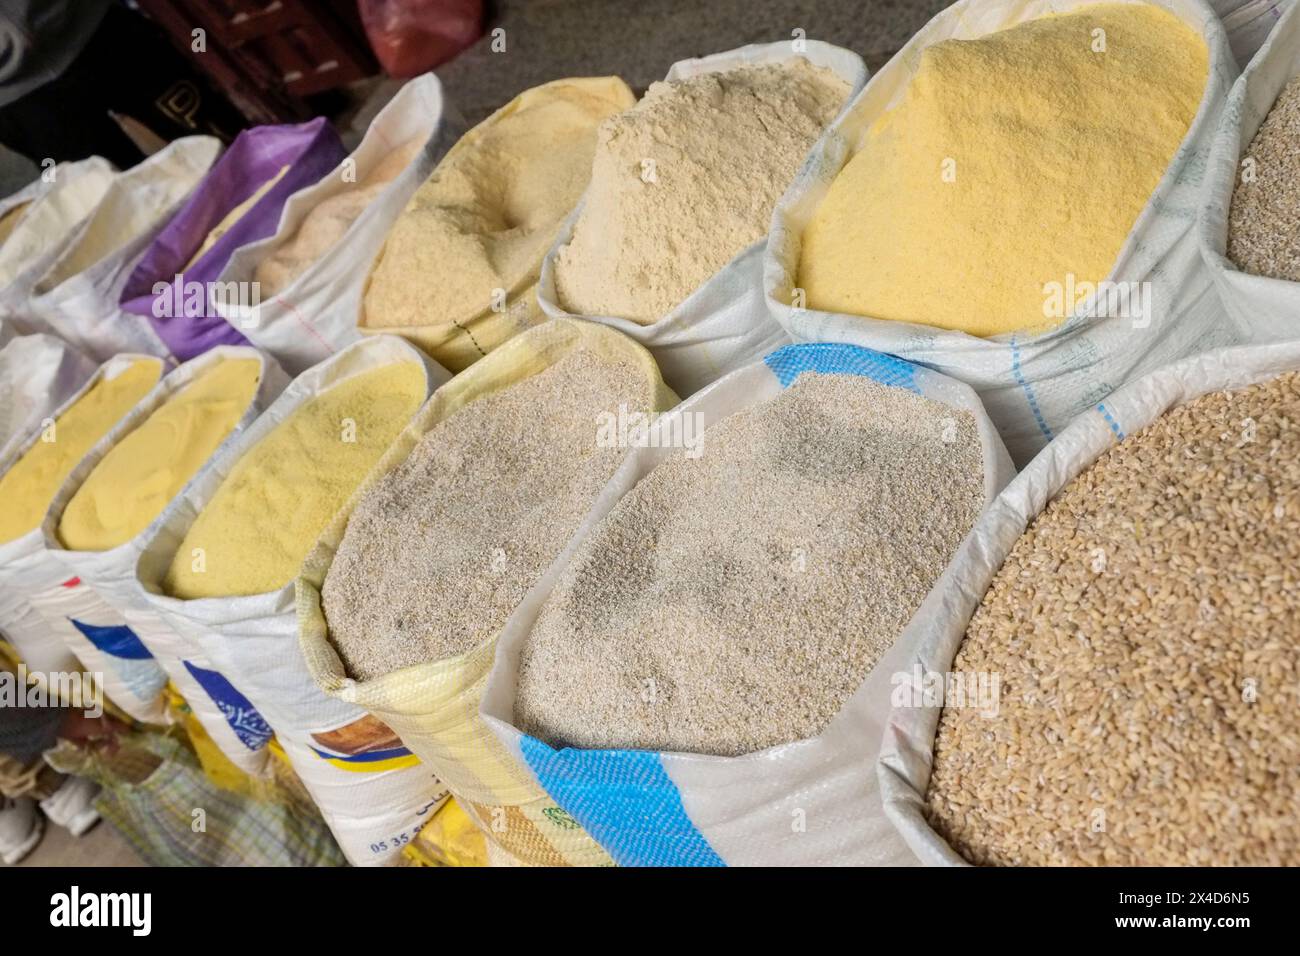 Fes, Morocco. Sacks of grains and cous cous for sale. Stock Photo